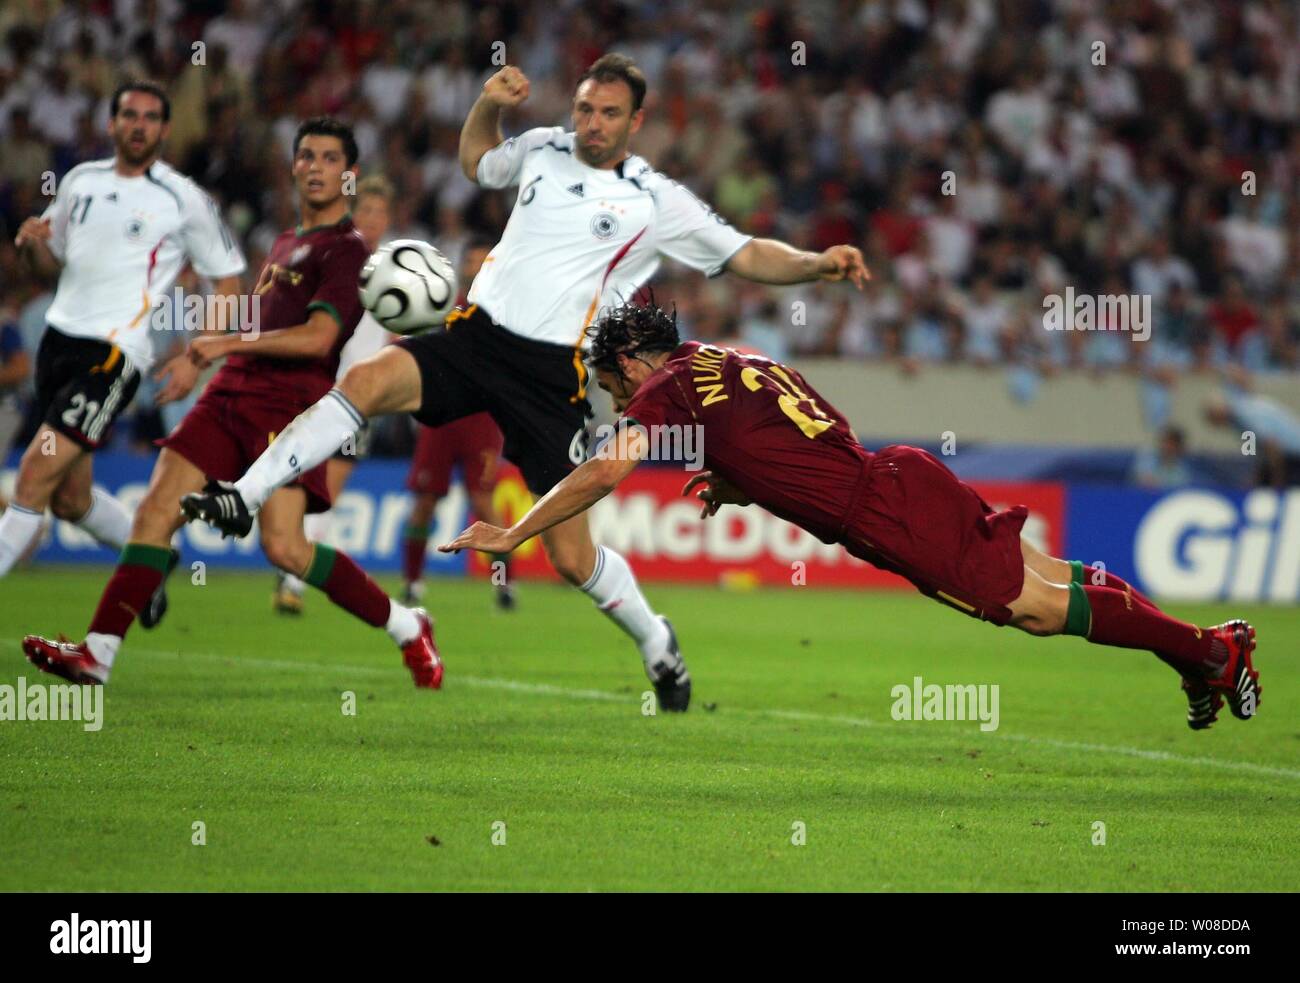 Portugal's Nuno Gomes scores with a header in 2006 FIFA World Cup soccer in Stuttgart, Germany on July 8, 2006. Germany defeated Portugal 3-1 to capture third place in the World Cup.  (UPI Photo/Christian Brunskill) Stock Photo